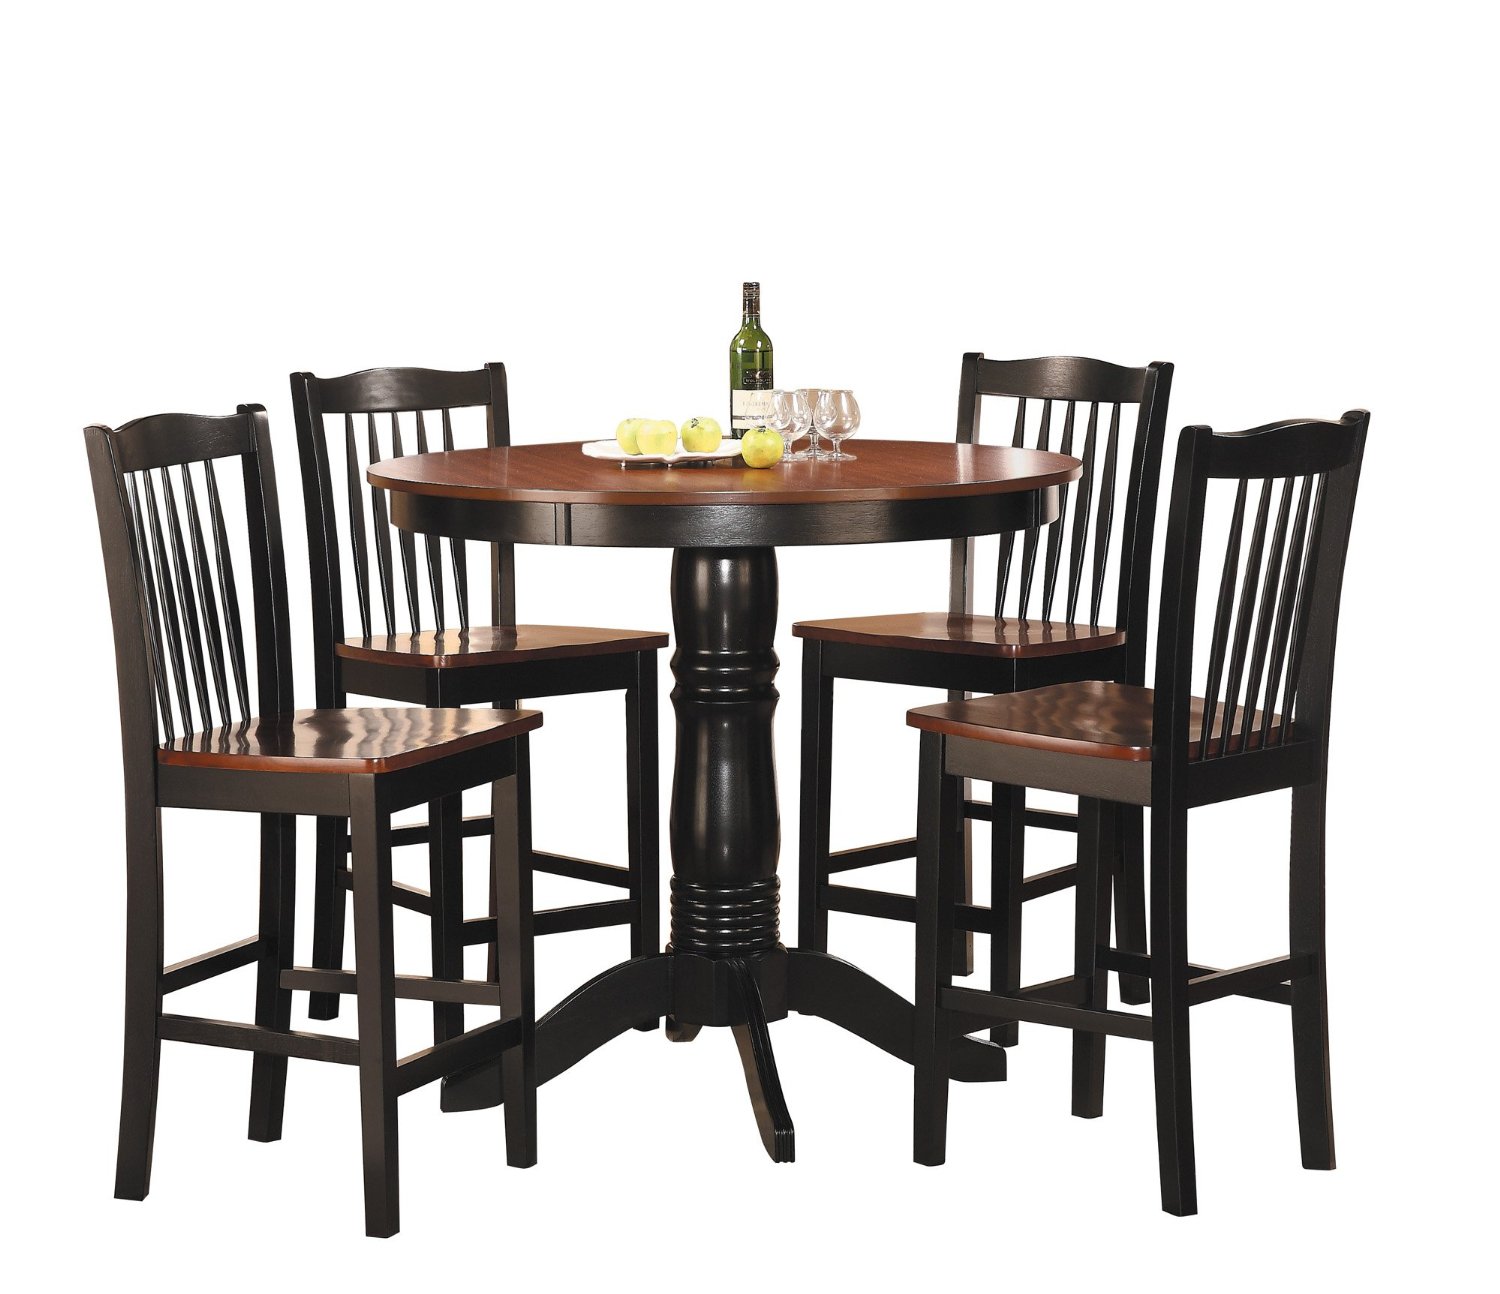 Awesome kitchen table sets under 500 you should have